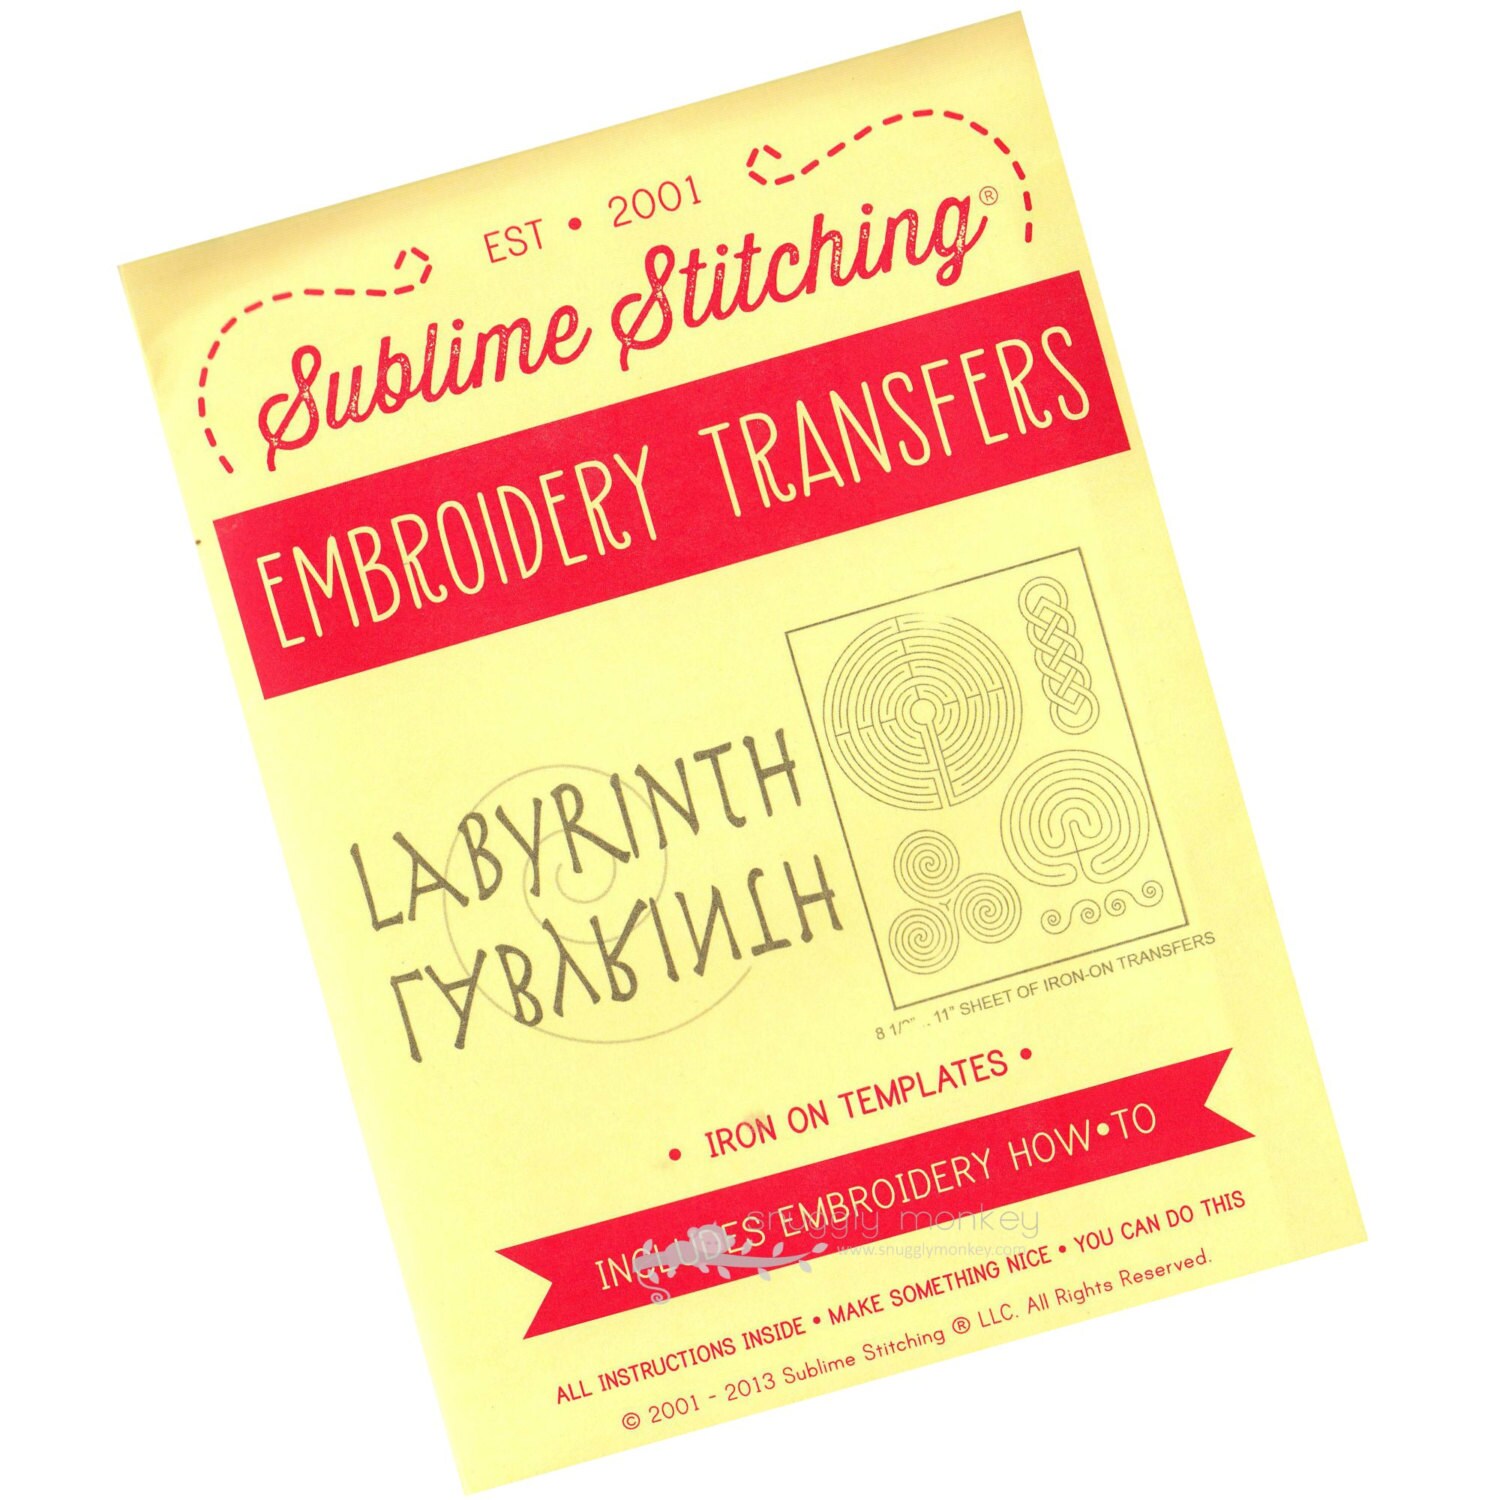 Ft. Lonesome Sublime Stitching Embroidery Patterns Iron On Transfers